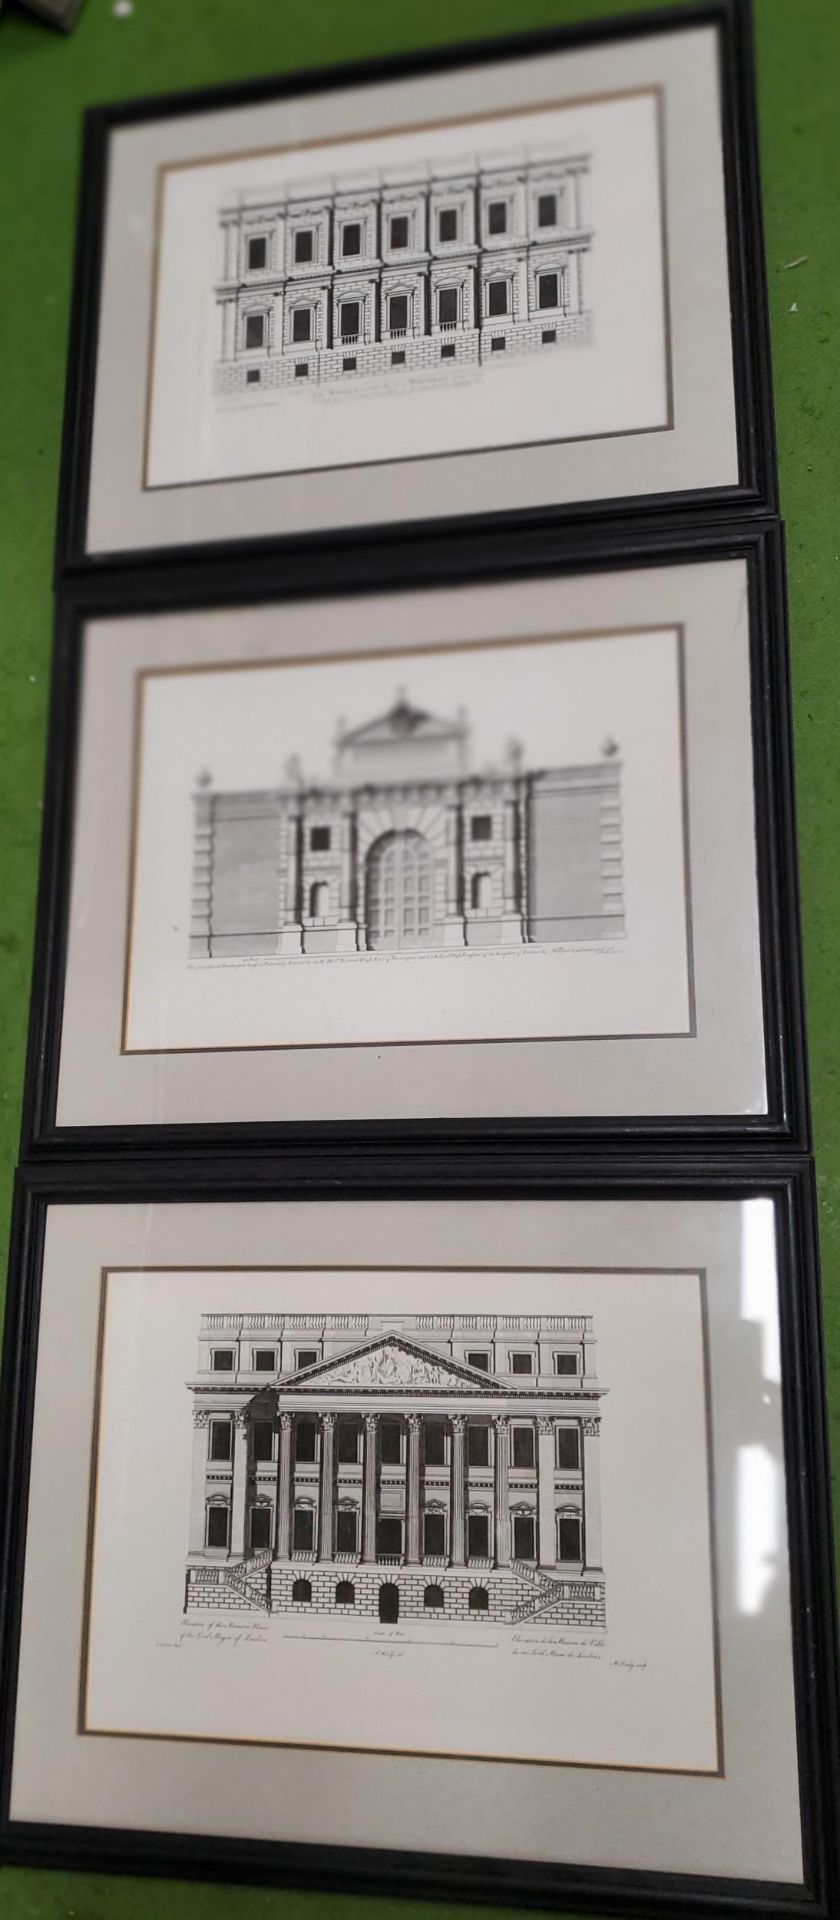 A GROUP OF THREE FRAMED ARCHITECTURAL PRINTS